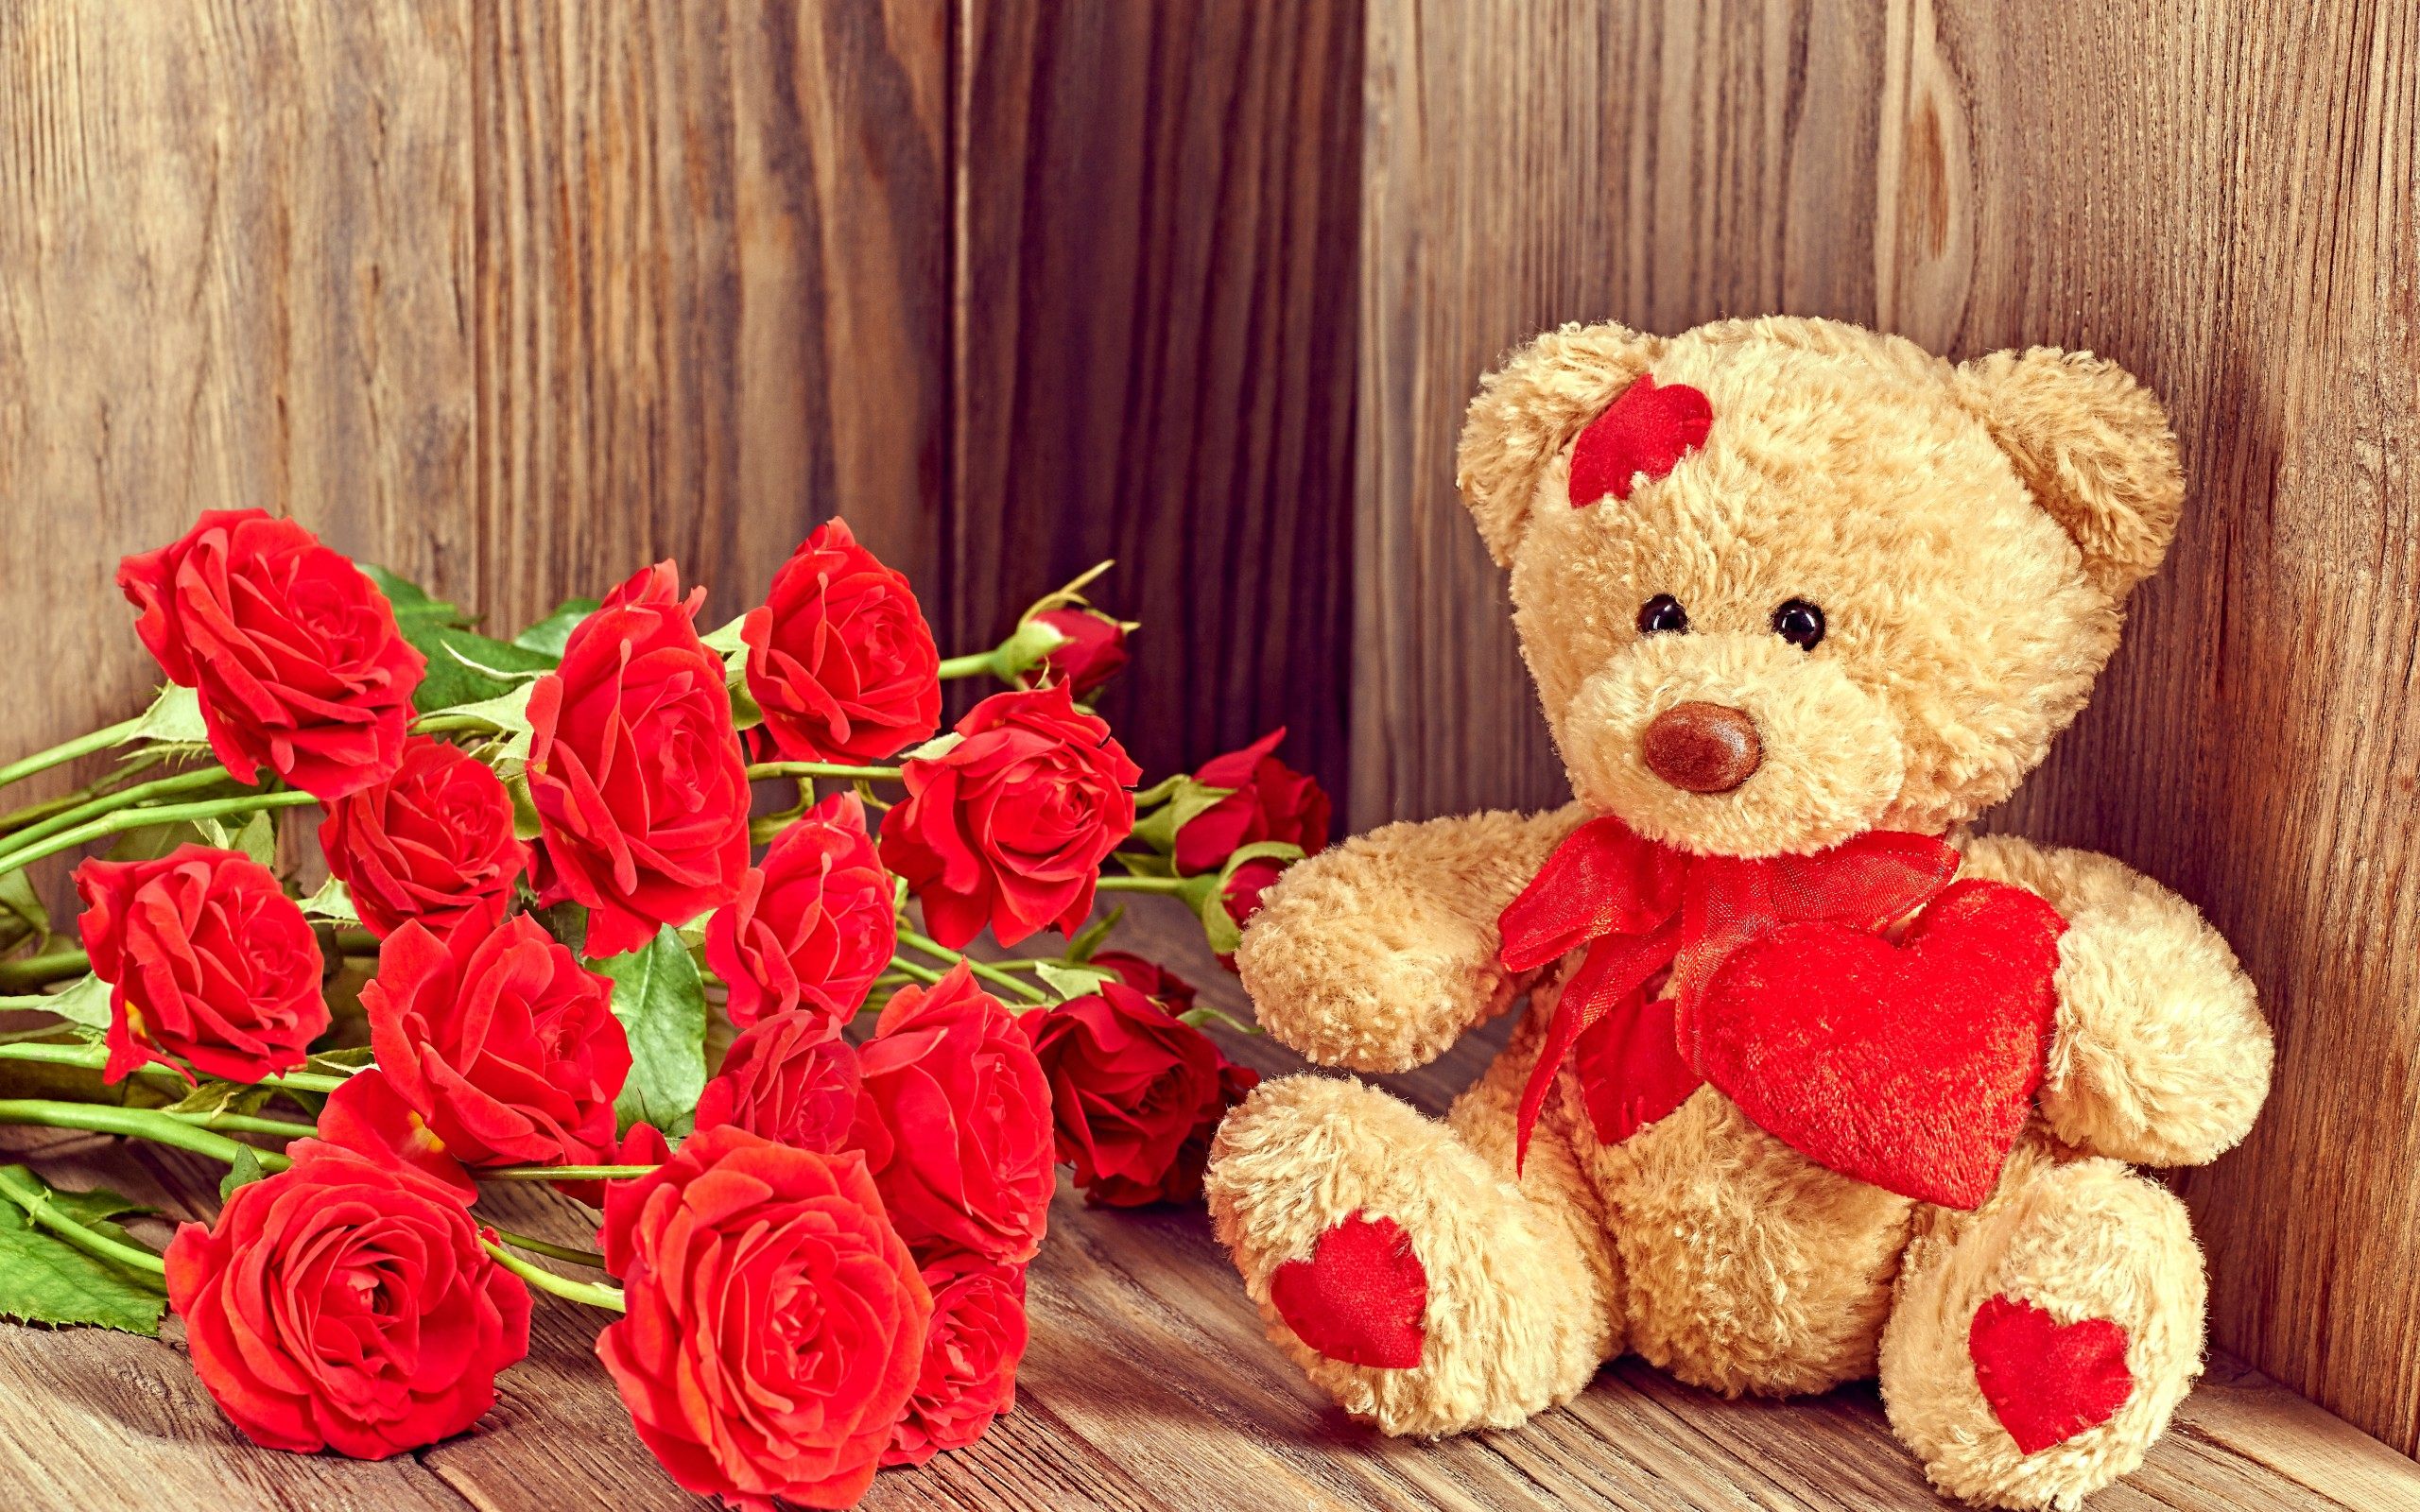 Love Teddy And Red Roses Wallpaper HD For Desktop Amp Mobile